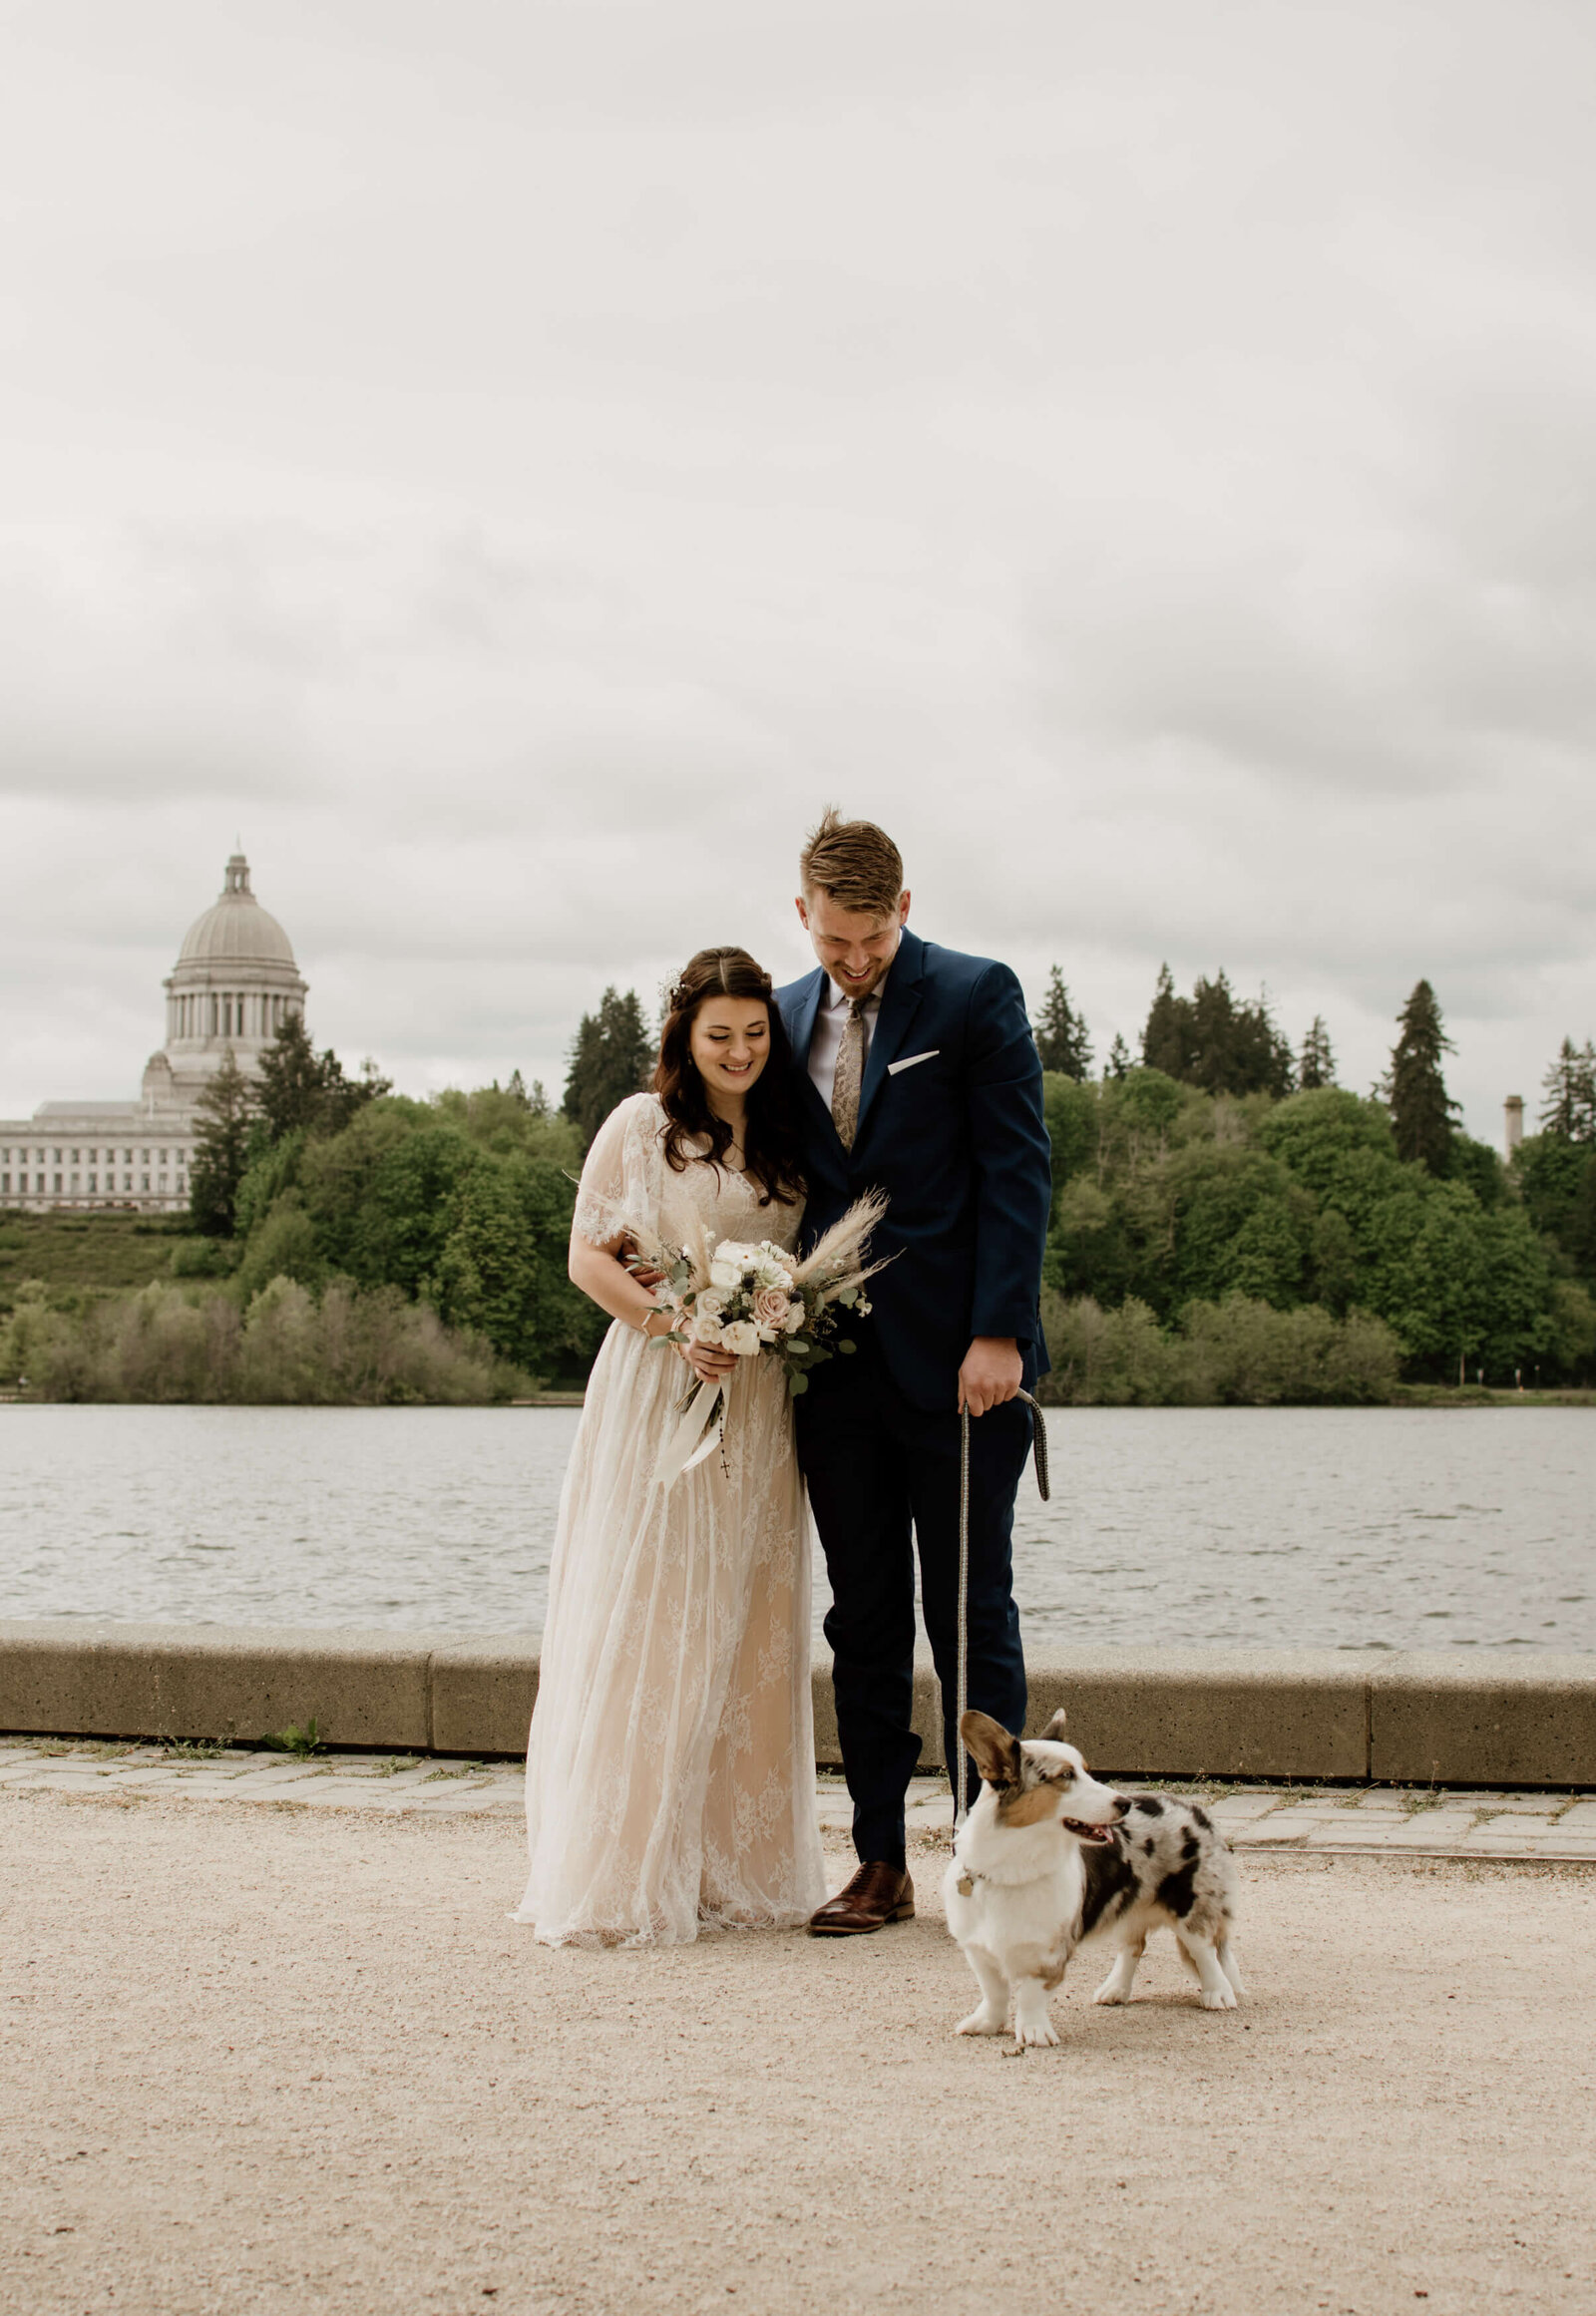 Bride and Groom with their dog.